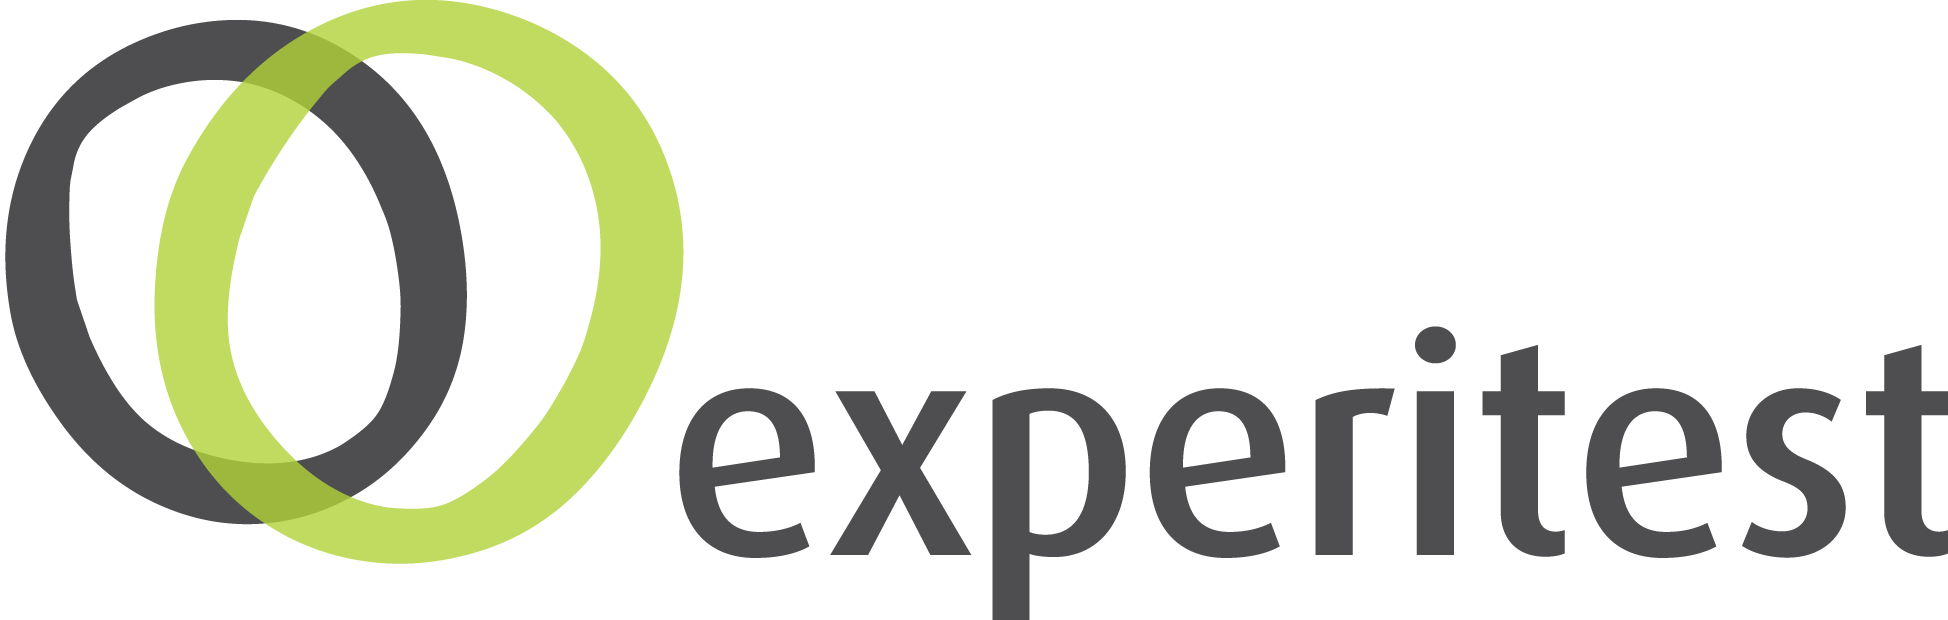 Experitest Logo (1).png